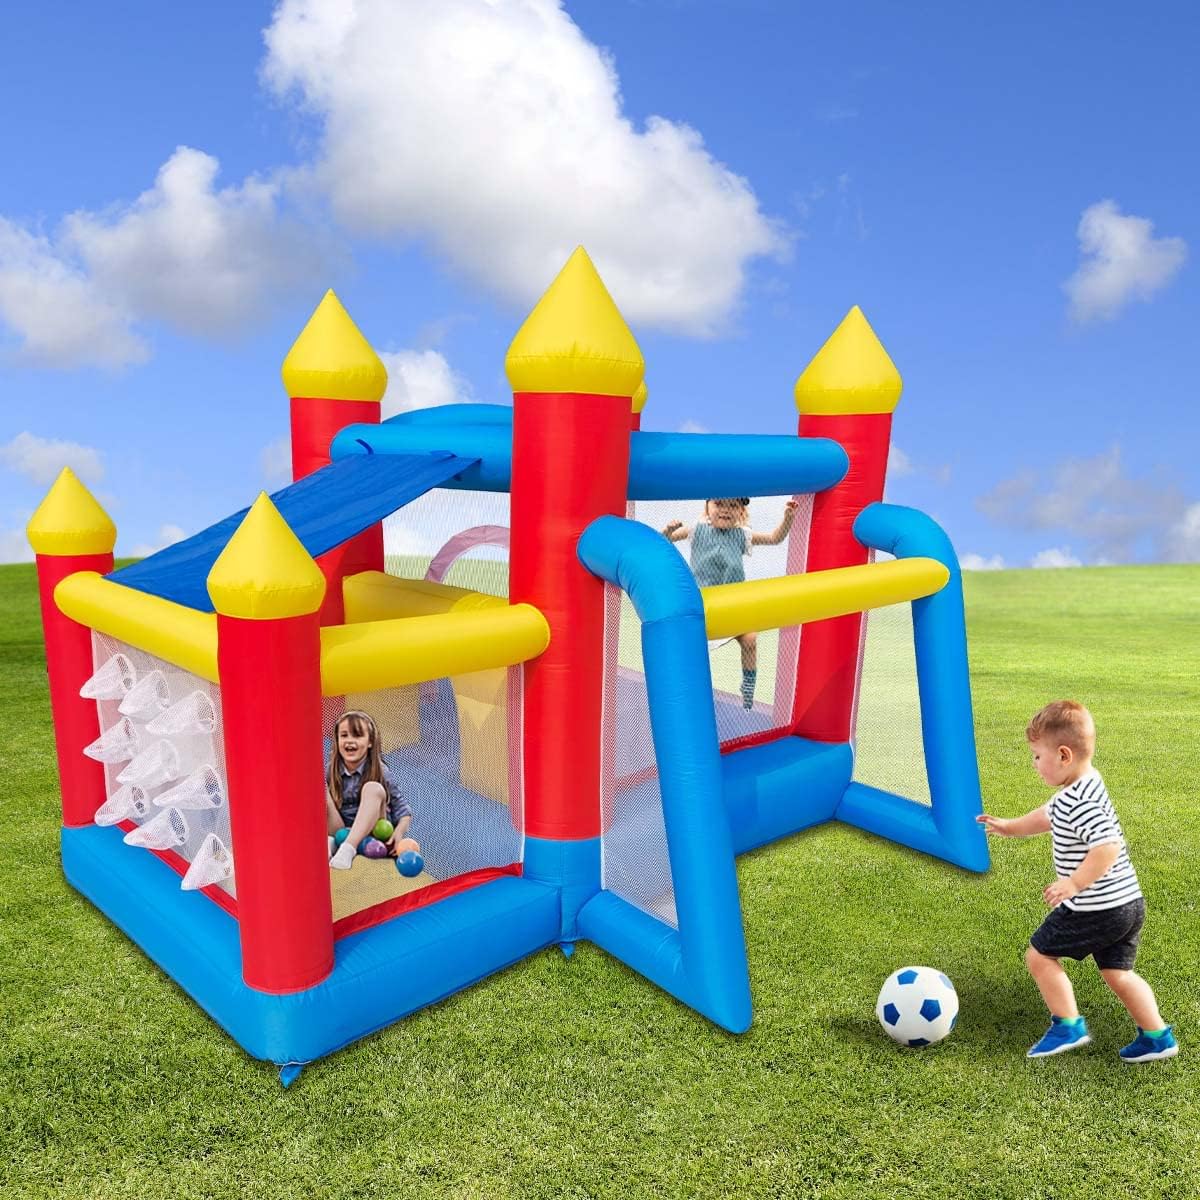 Ballsea Bouncy Castle, 6 in 1 Inflatable Bounce Castle House with Blower, Inflatable Slide with Extra Sun Cover for Kids Indoor Outdoor